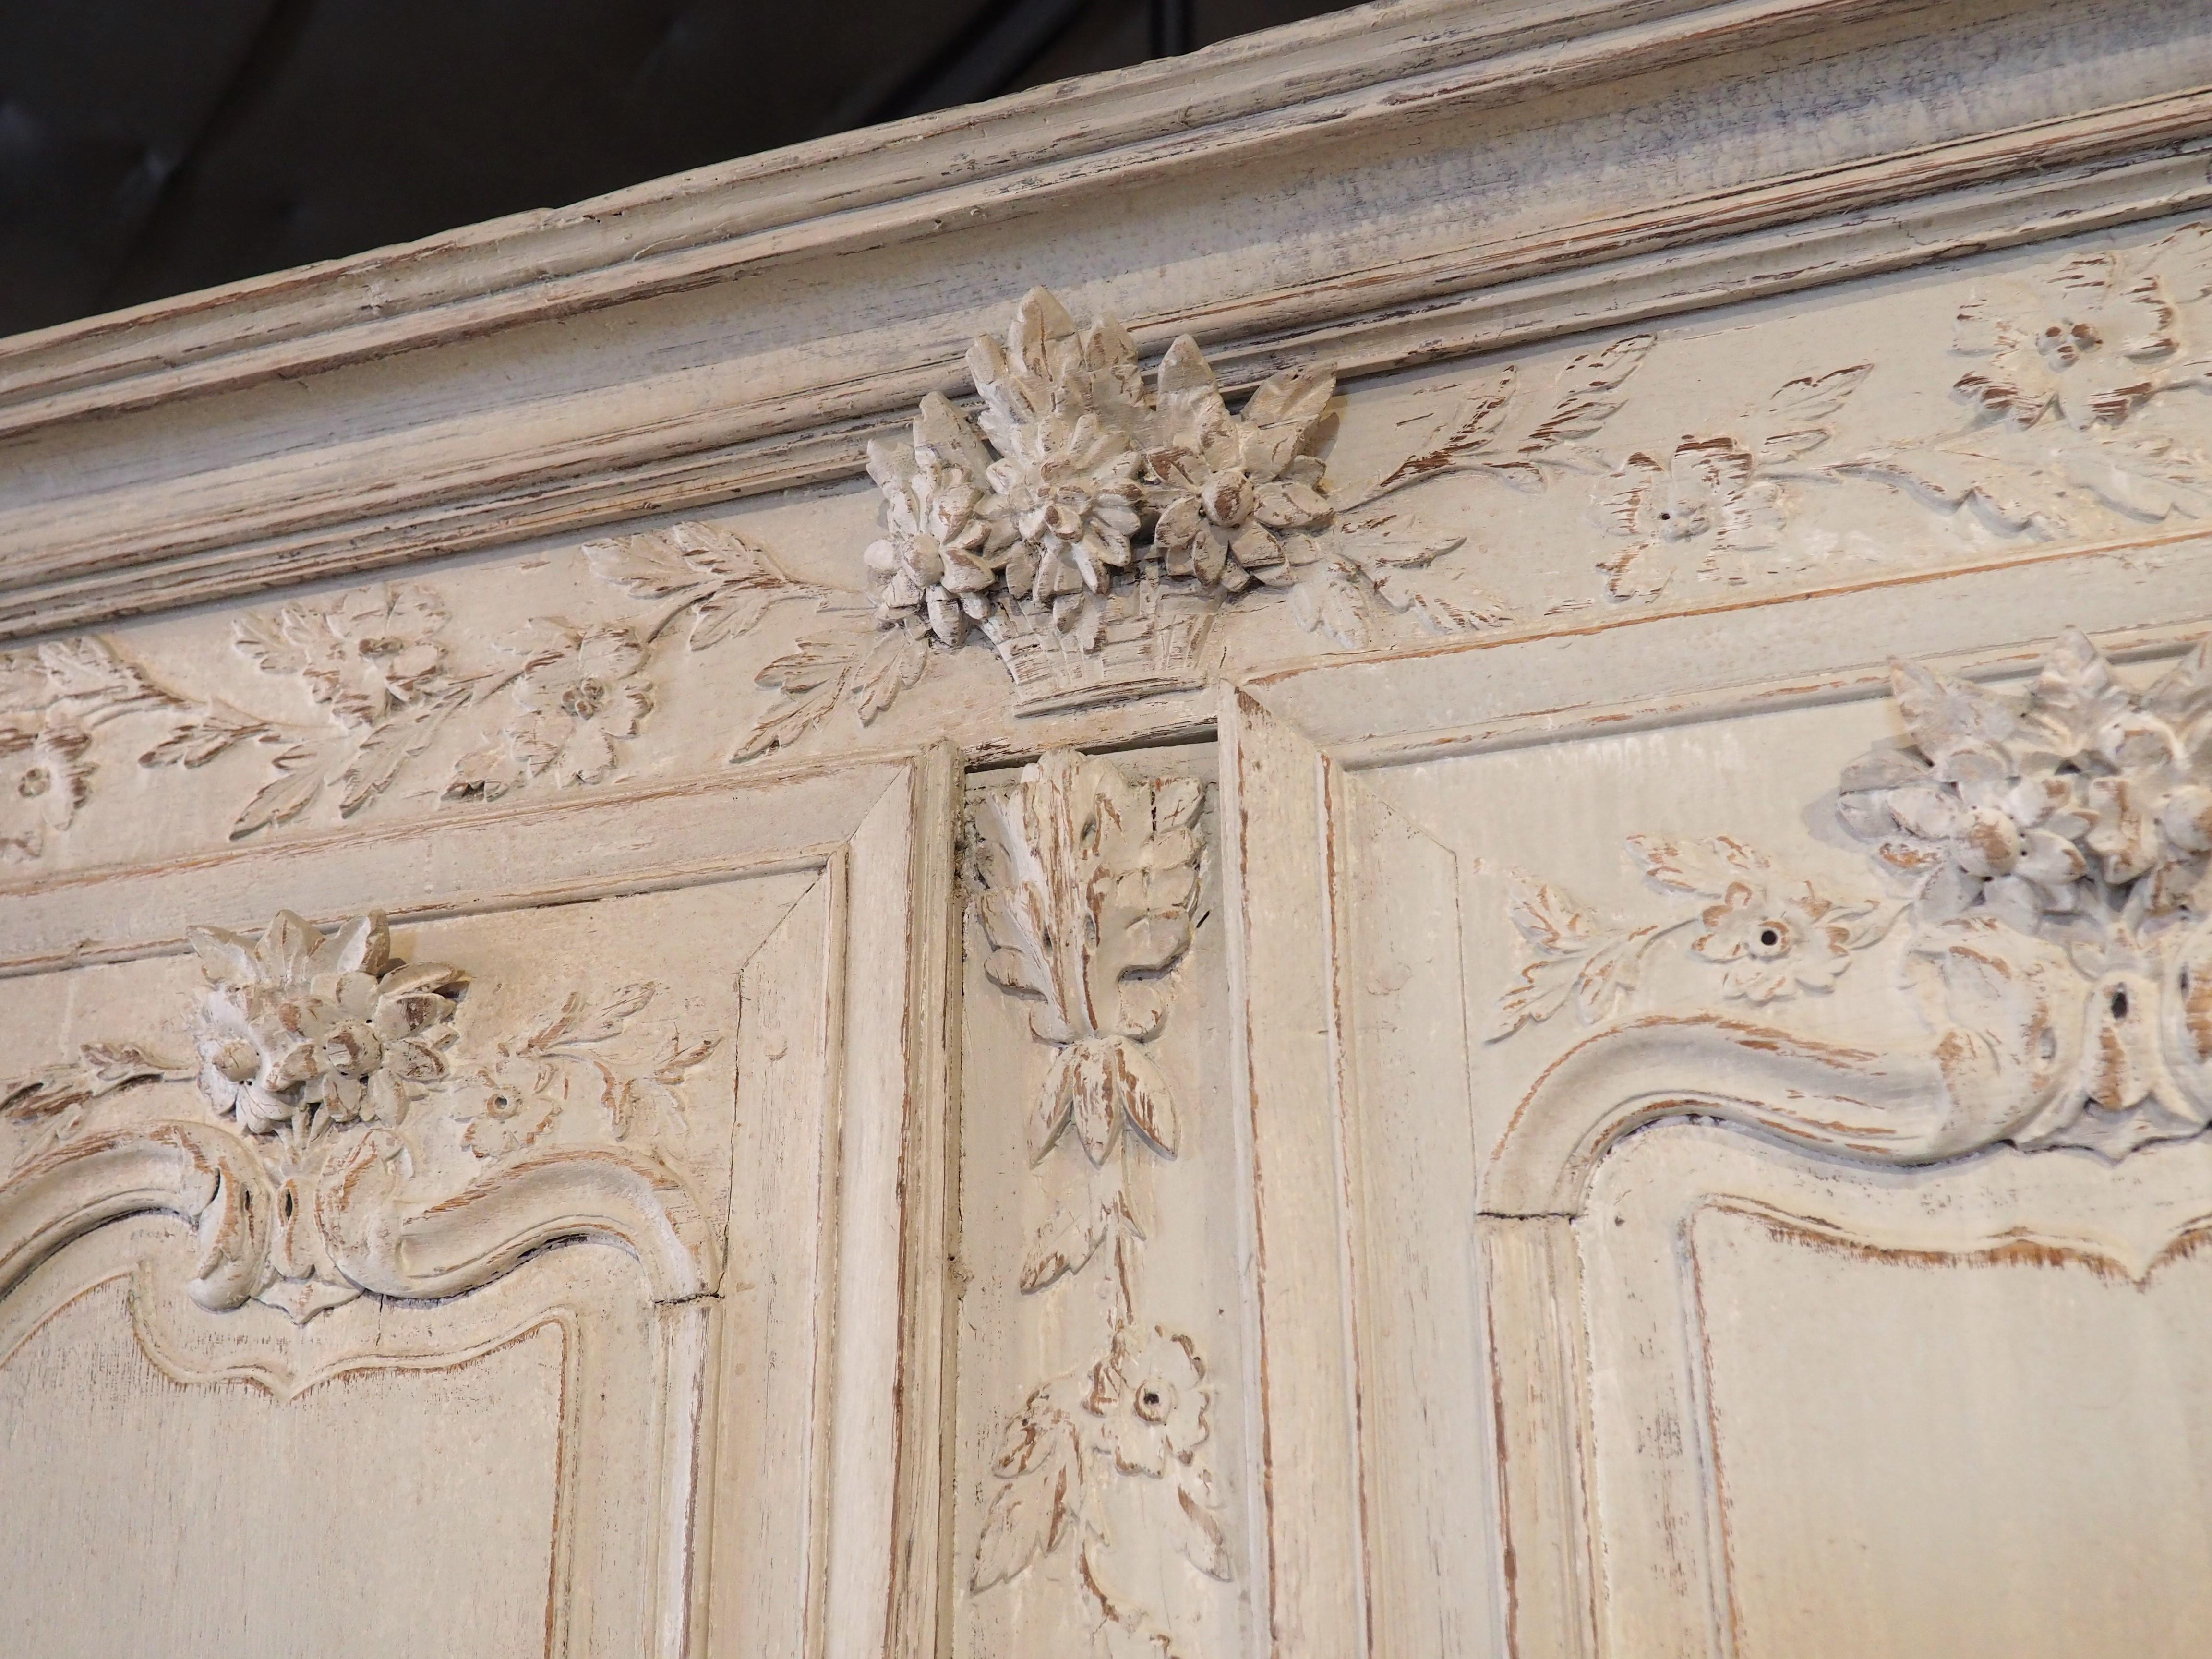 Most antique French furnishings that originated from Normandy were made from oak, which is a durable hardwood that is rather difficult to carve. Based on the rich and artistic décor that graces the cabinet, this buffet deux corps was hand-carved in